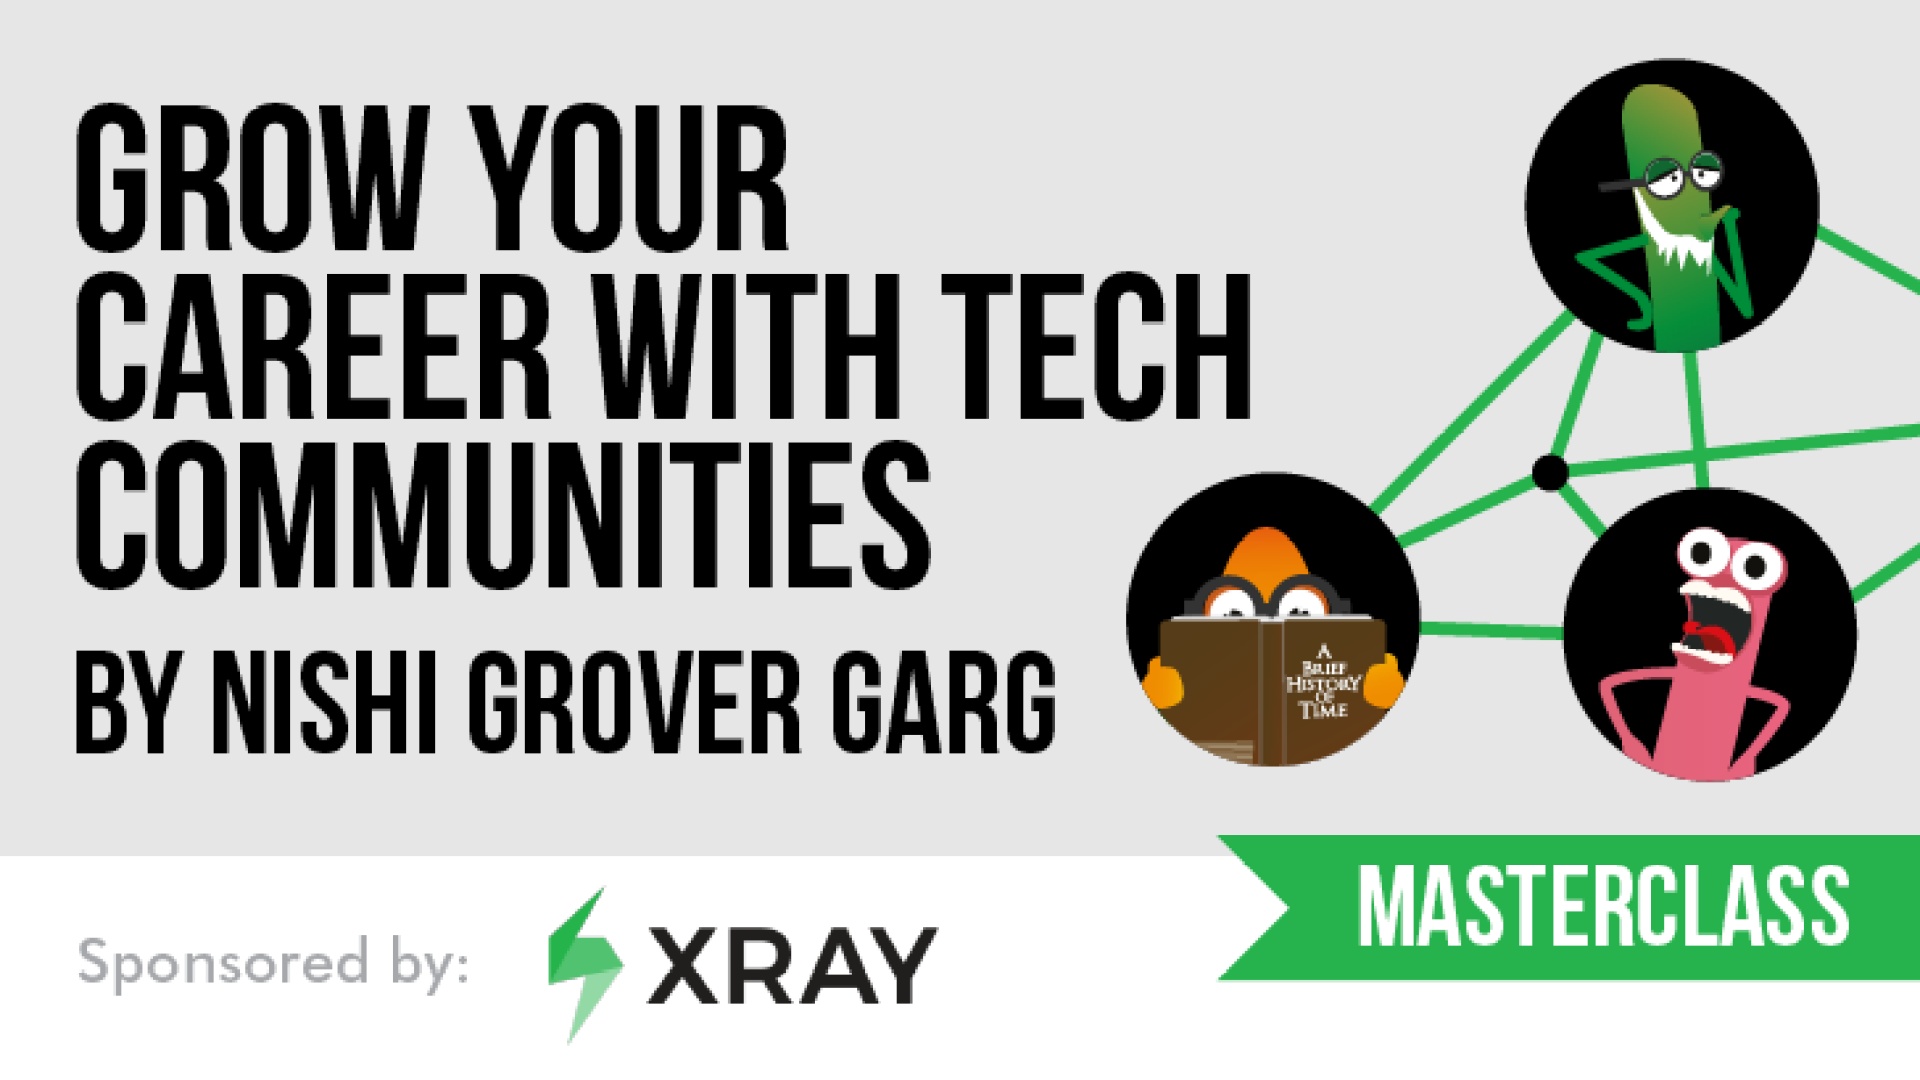 Grow your Career with Tech Communities image